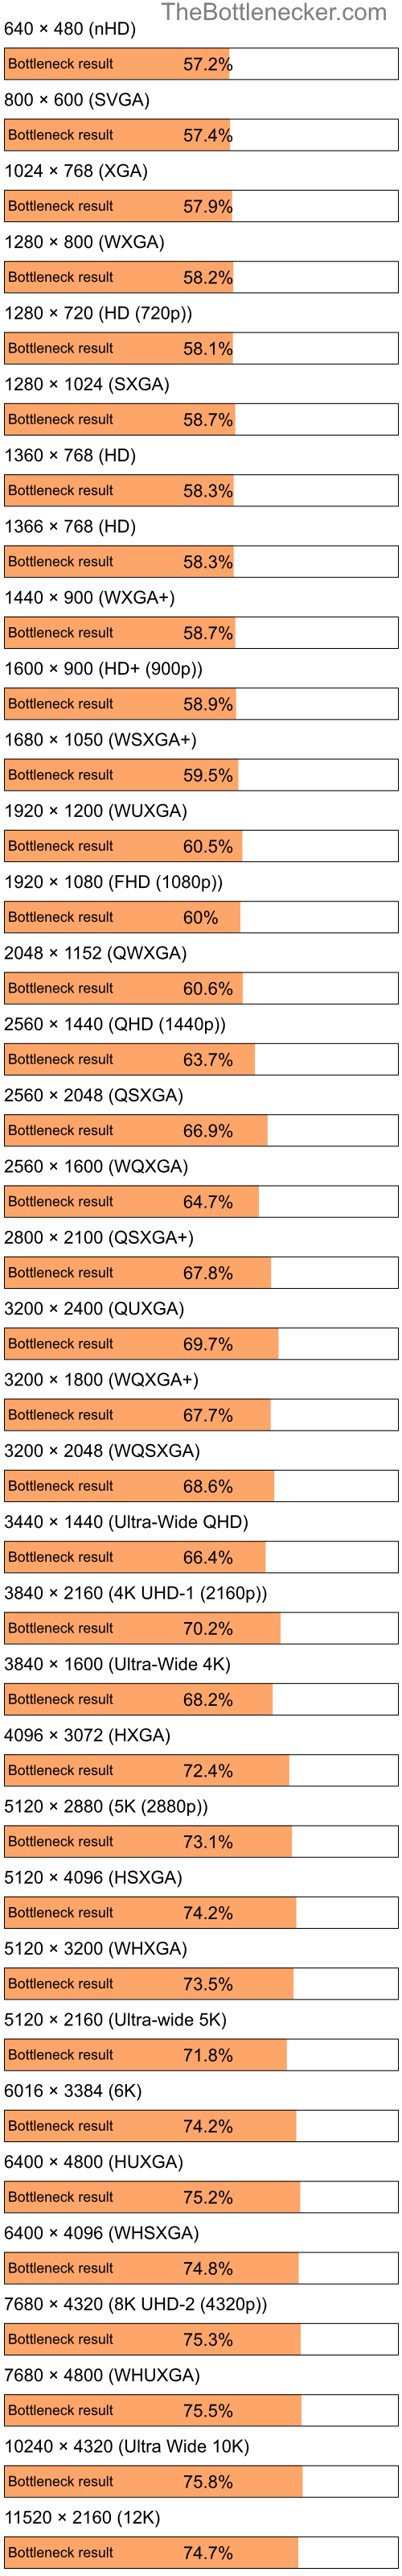 Bottleneck results by resolution for Intel Celeron M 420 and AMD Radeon X1600 Pro in Processor Intense Tasks